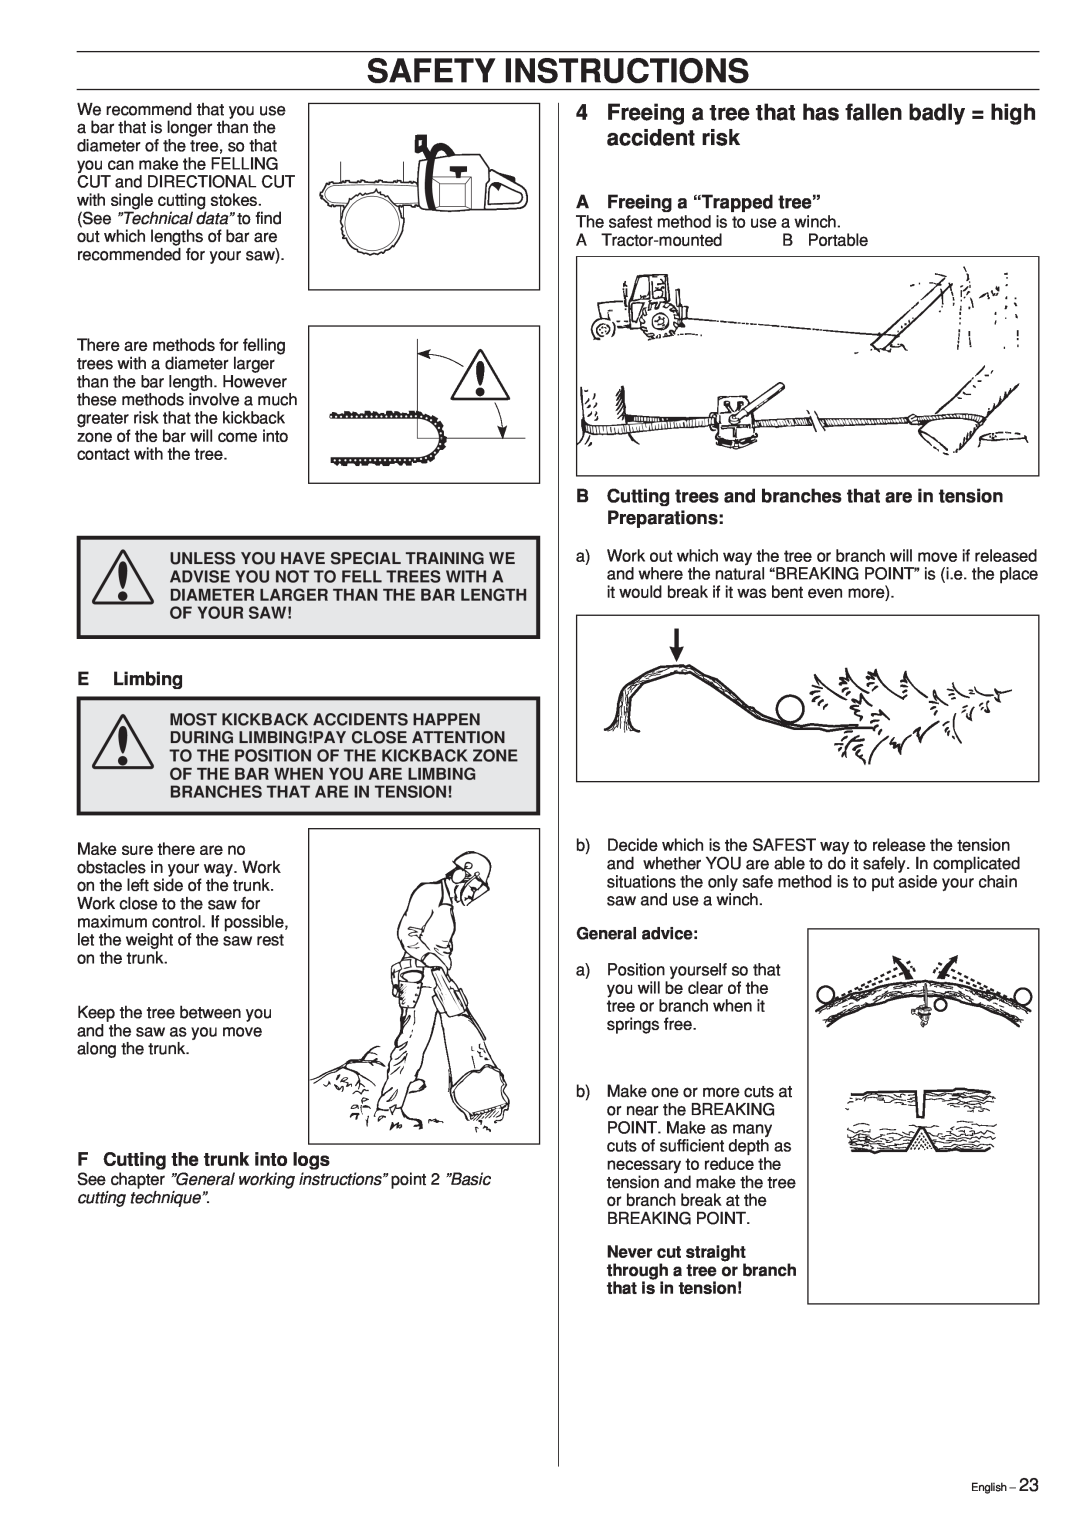 Husqvarna 346XP 351 manual Safety Instructions, E Limbing, F Cutting the trunk into logs, AFreeing a “Trapped tree” 